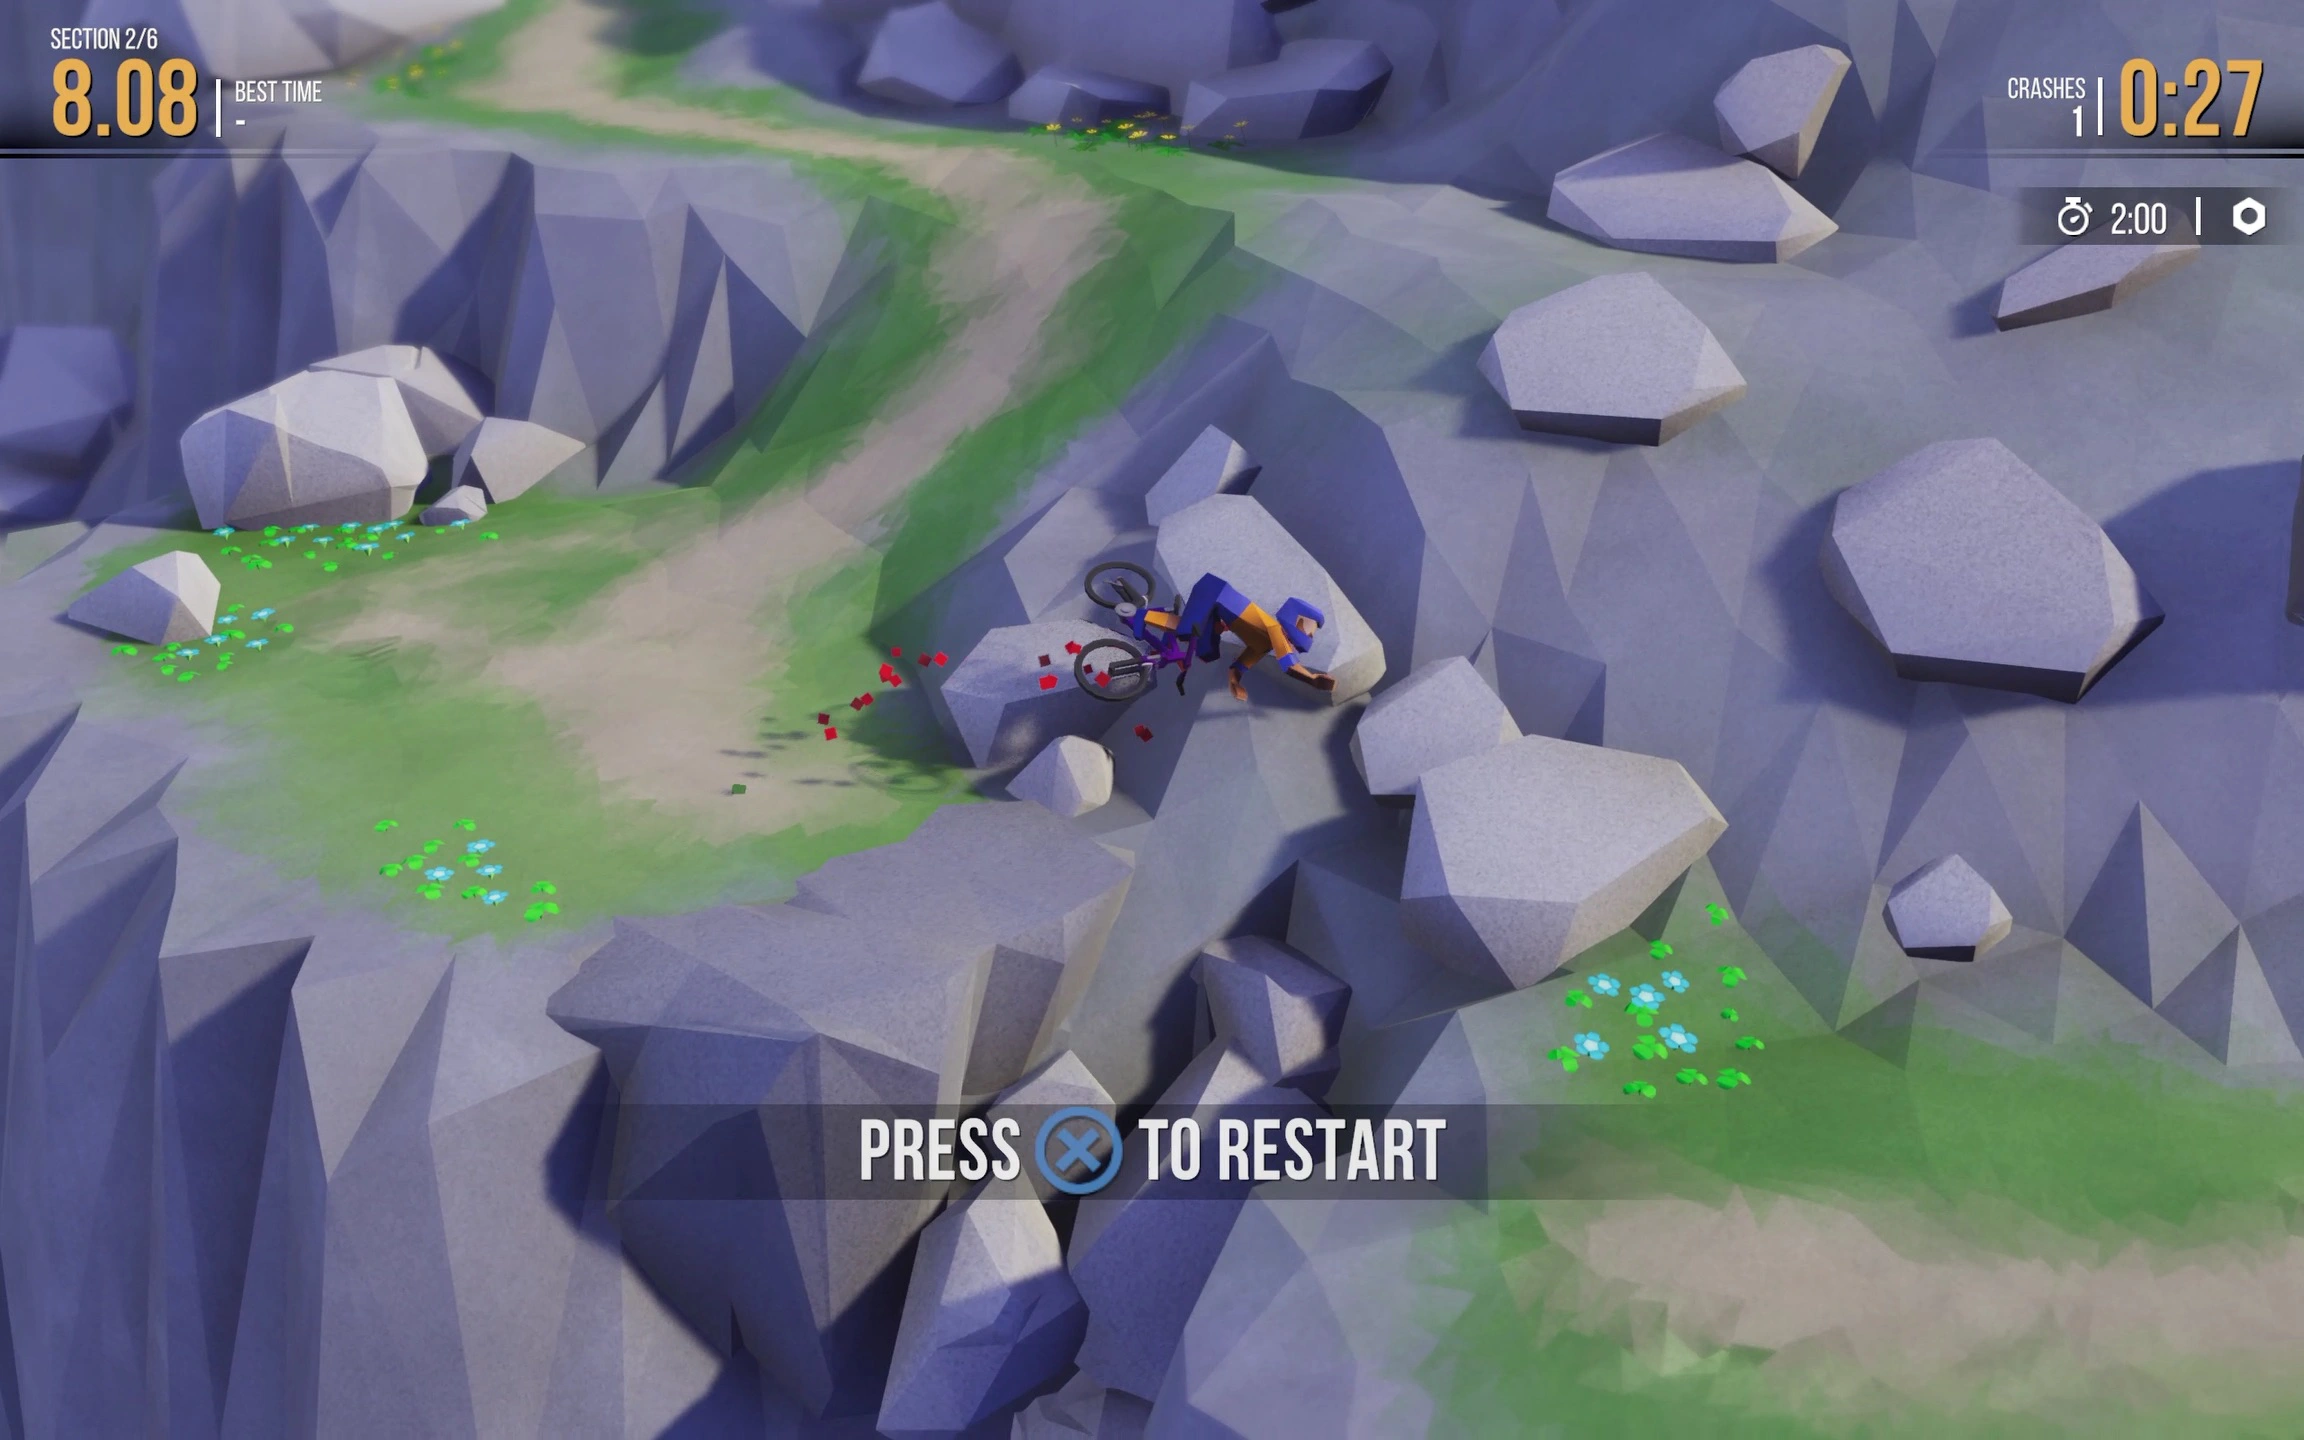 A player and bike being thrown into the rocks with red voxels spilling everywhere.